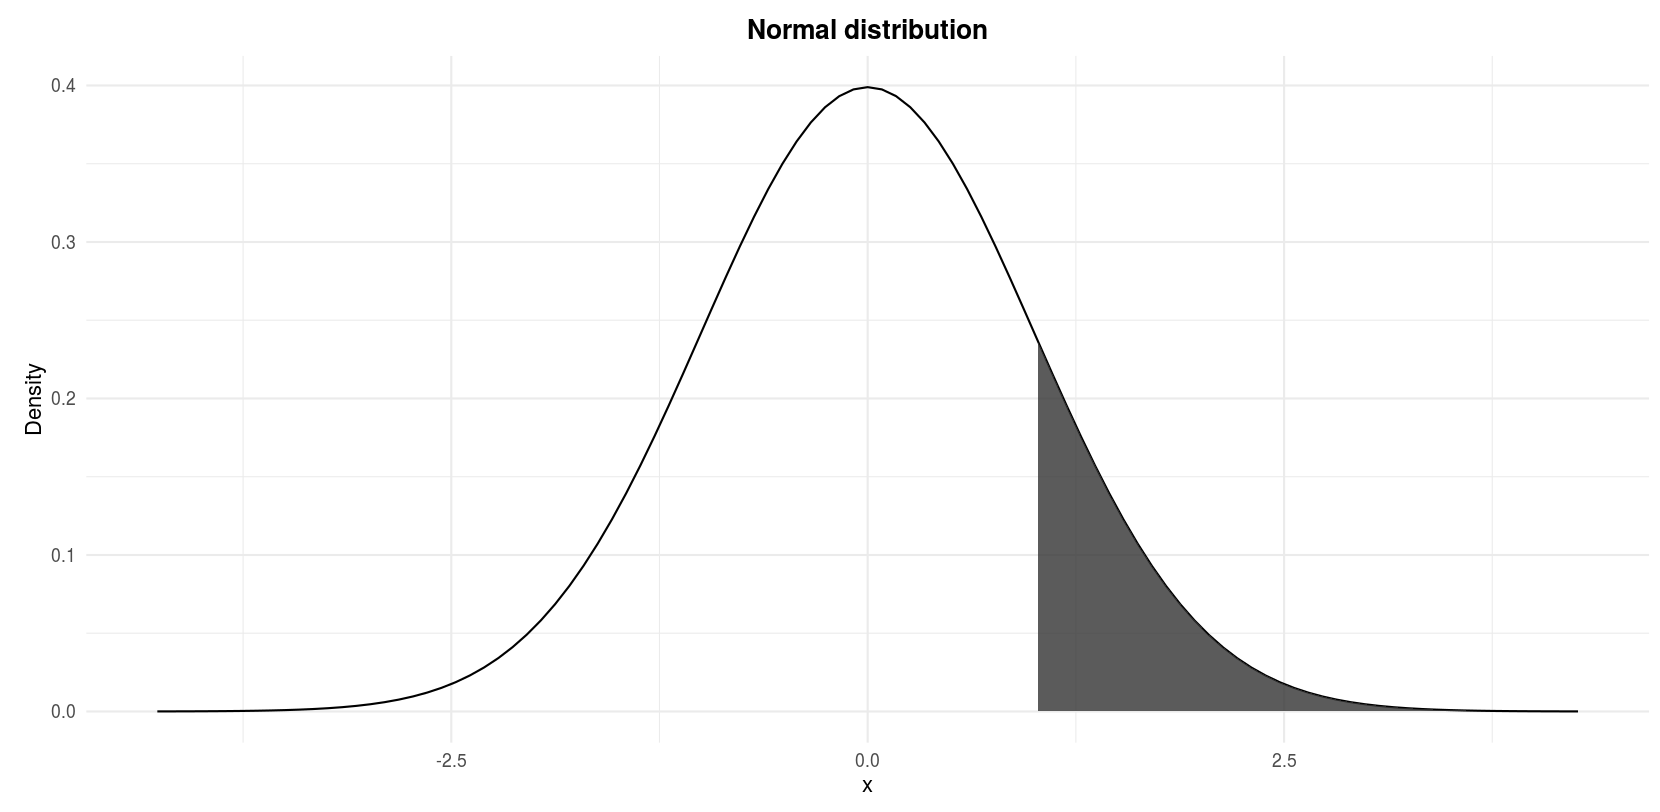 Do My Data Follow A Normal Distribution A Note On The Most Widely Used Distribution And How To Test For Normality In R Stats And R